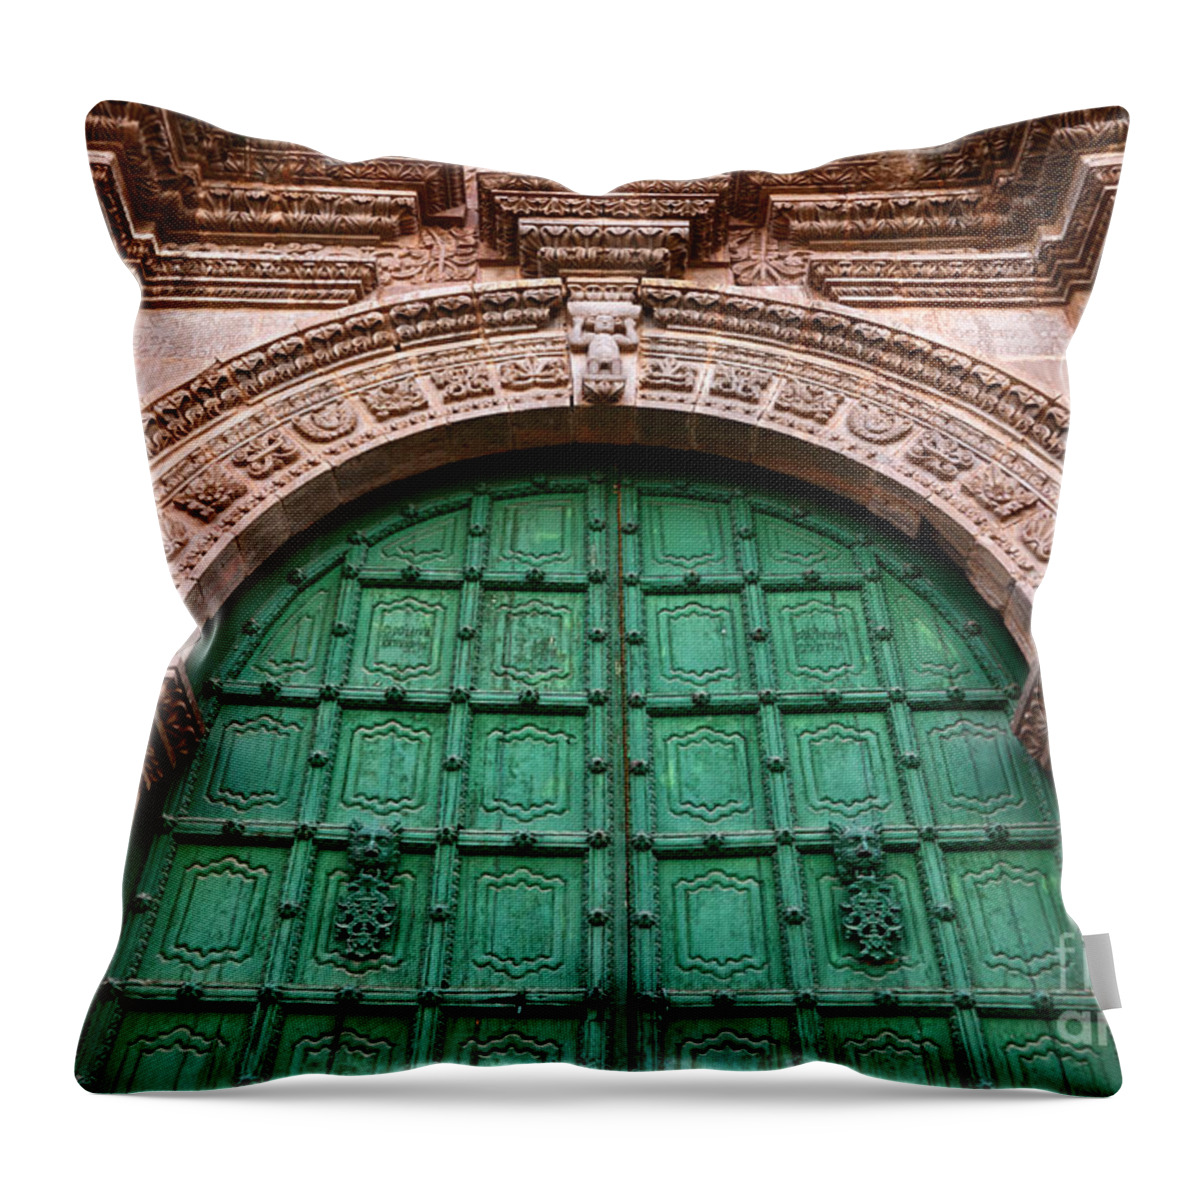 Peru Throw Pillow featuring the photograph Puno Cathedral Door 2 by James Brunker